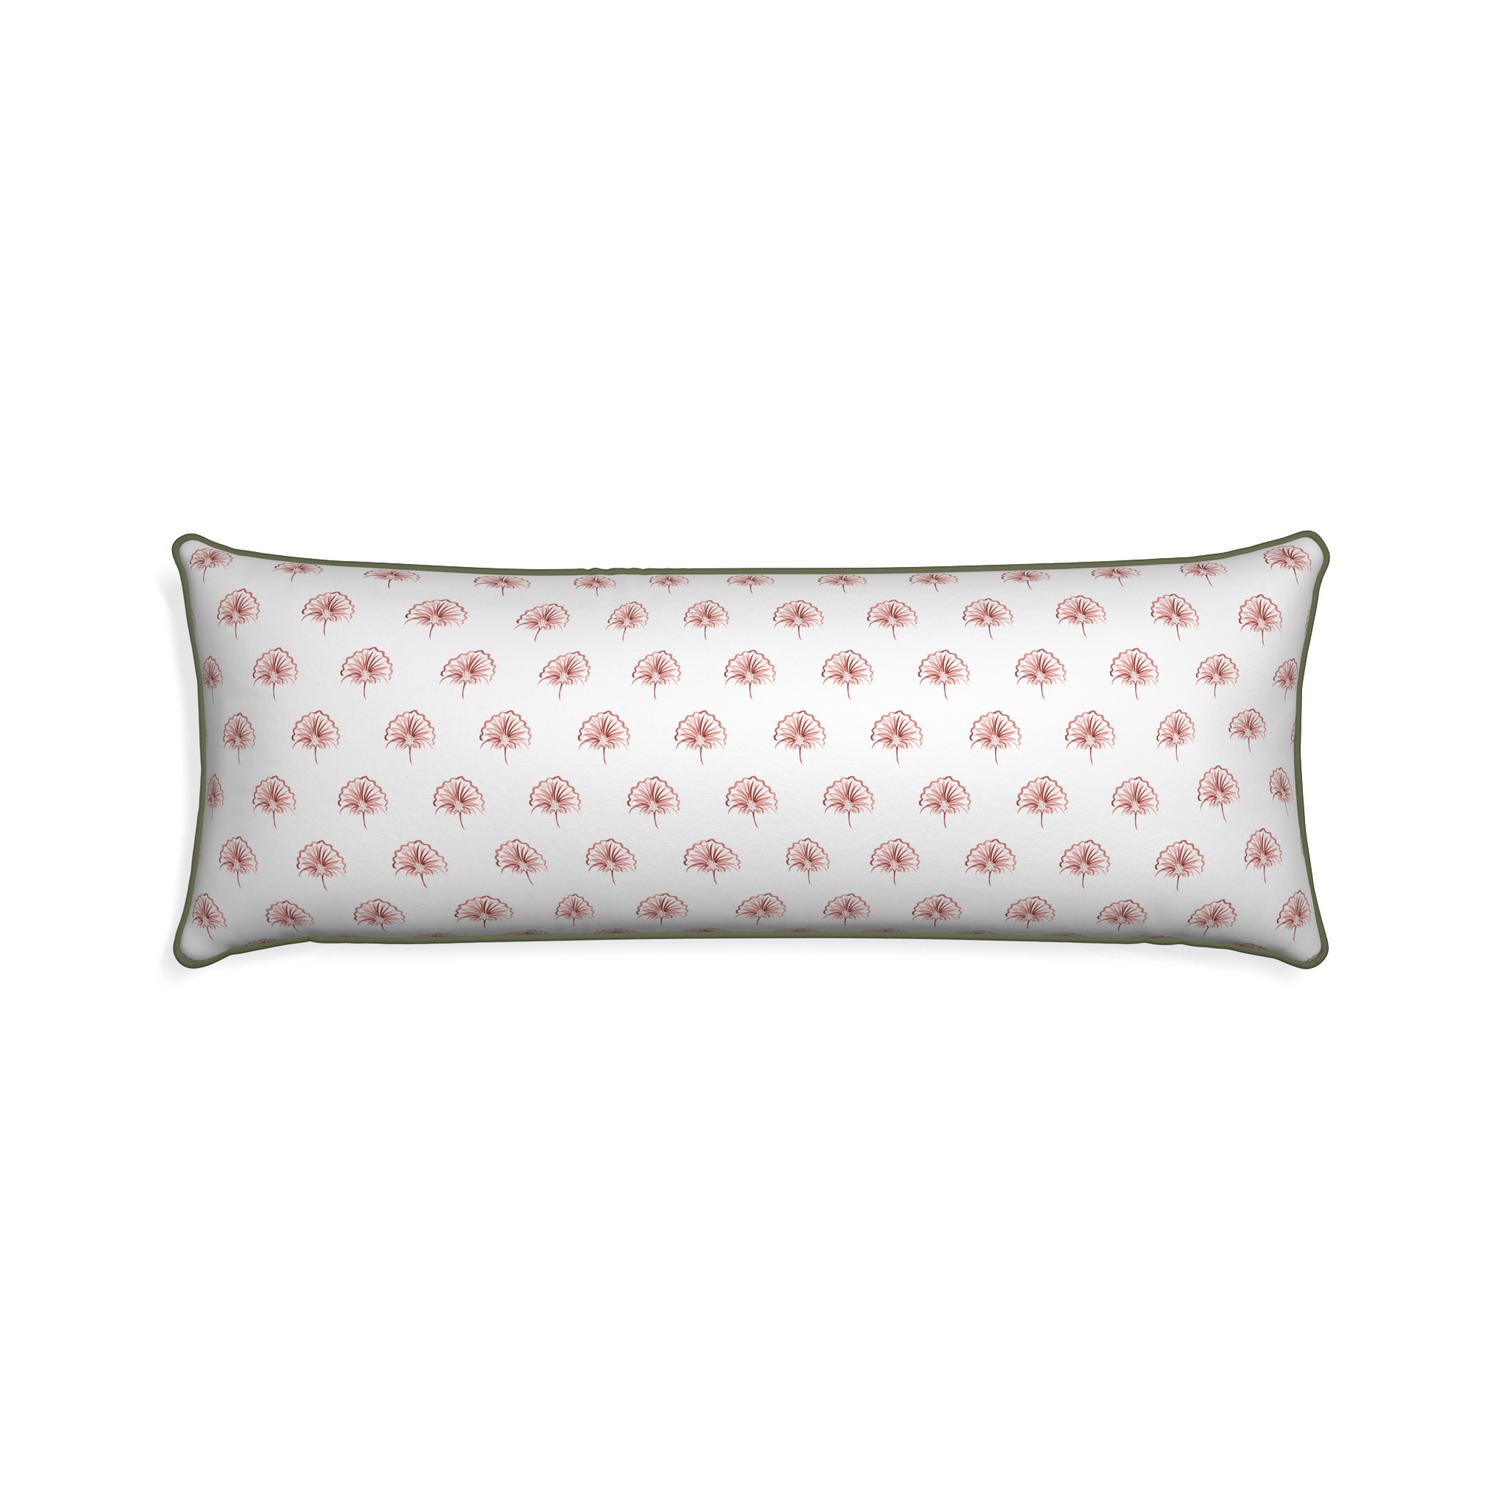 Xl-lumbar penelope rose custom pillow with f piping on white background